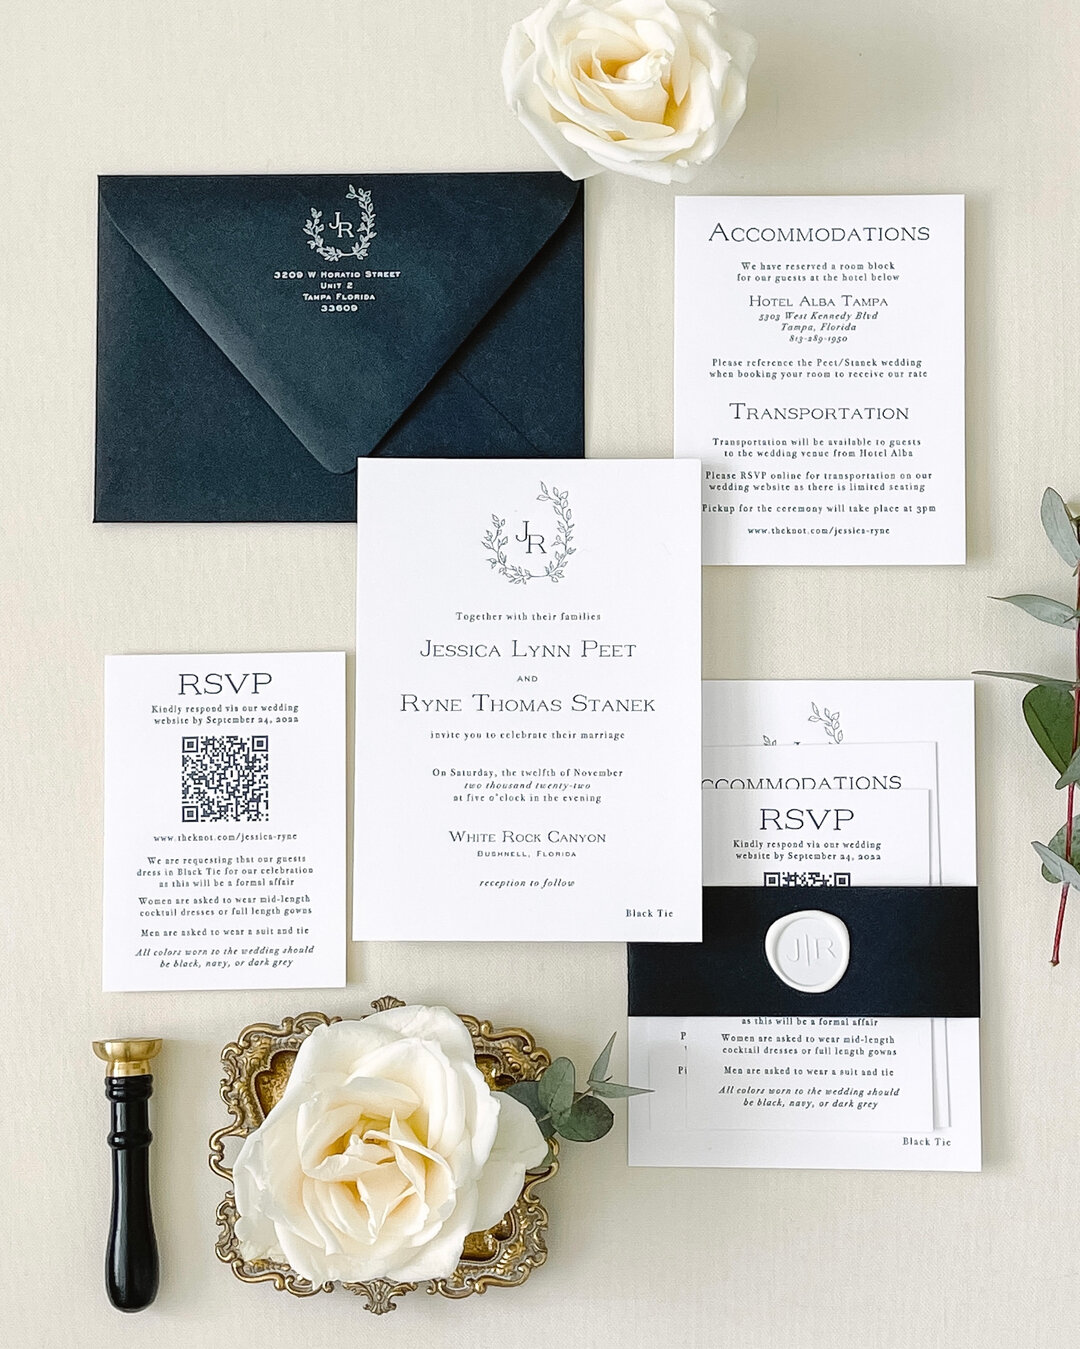 Jessica &amp; Ryne&rsquo;s wedding invitations were incredible, just like their celebration. We did a simple black and white letterpress wedding invitation with a beautiful monogram and it was so timeless. ❤️💌​​​​​​​​
​​​​​​​​
 #wedding #weddingday 